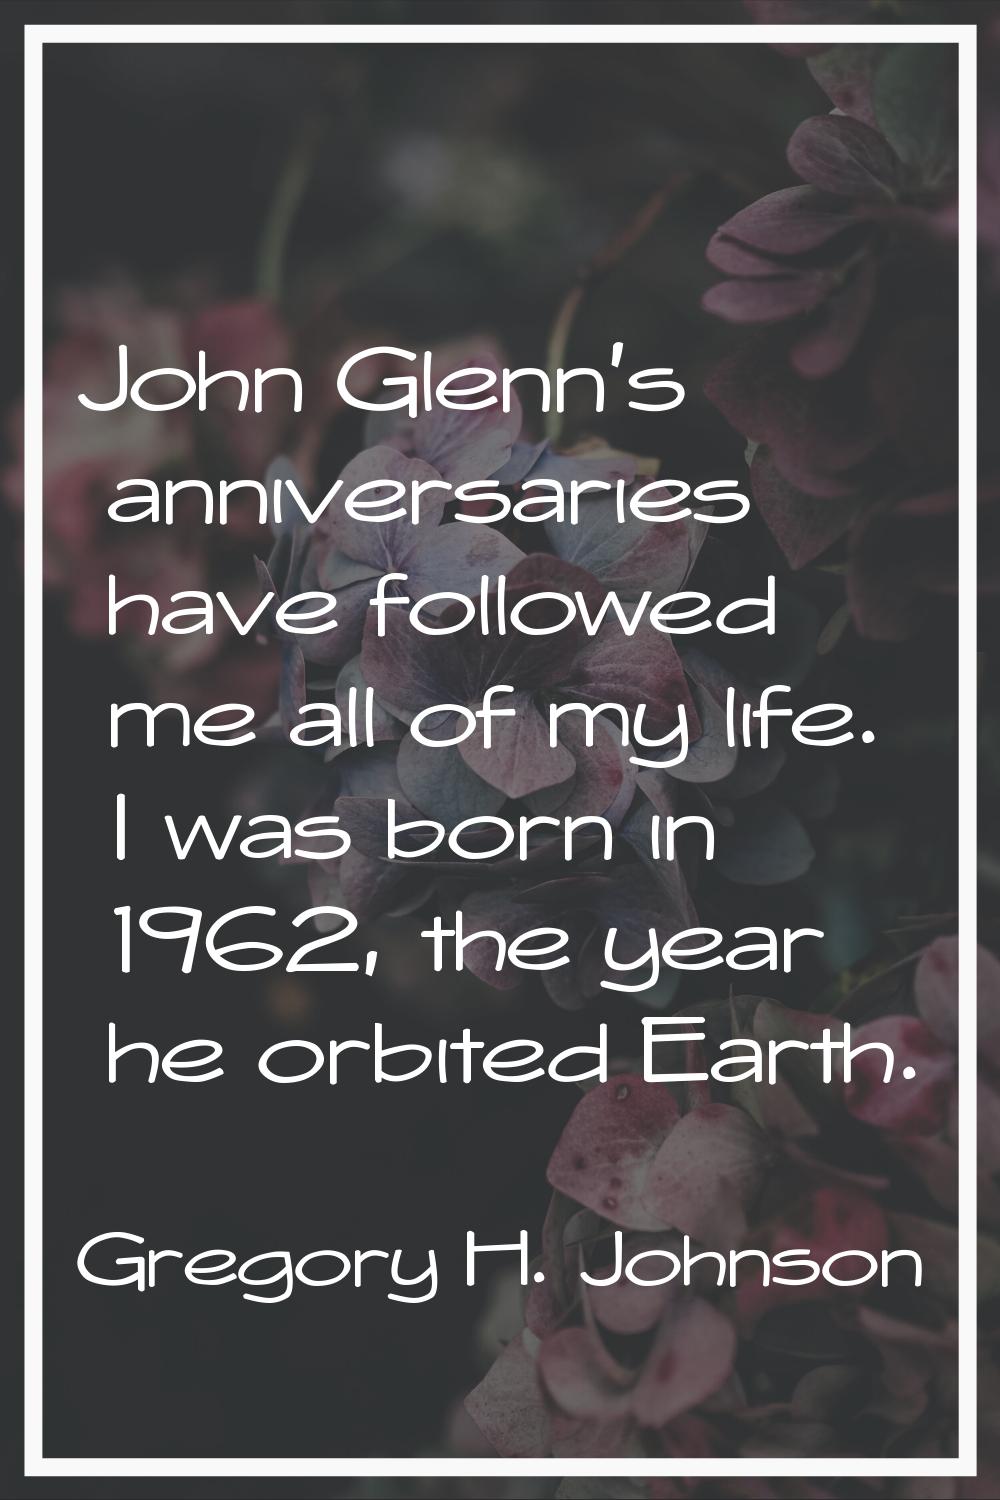 John Glenn's anniversaries have followed me all of my life. I was born in 1962, the year he orbited